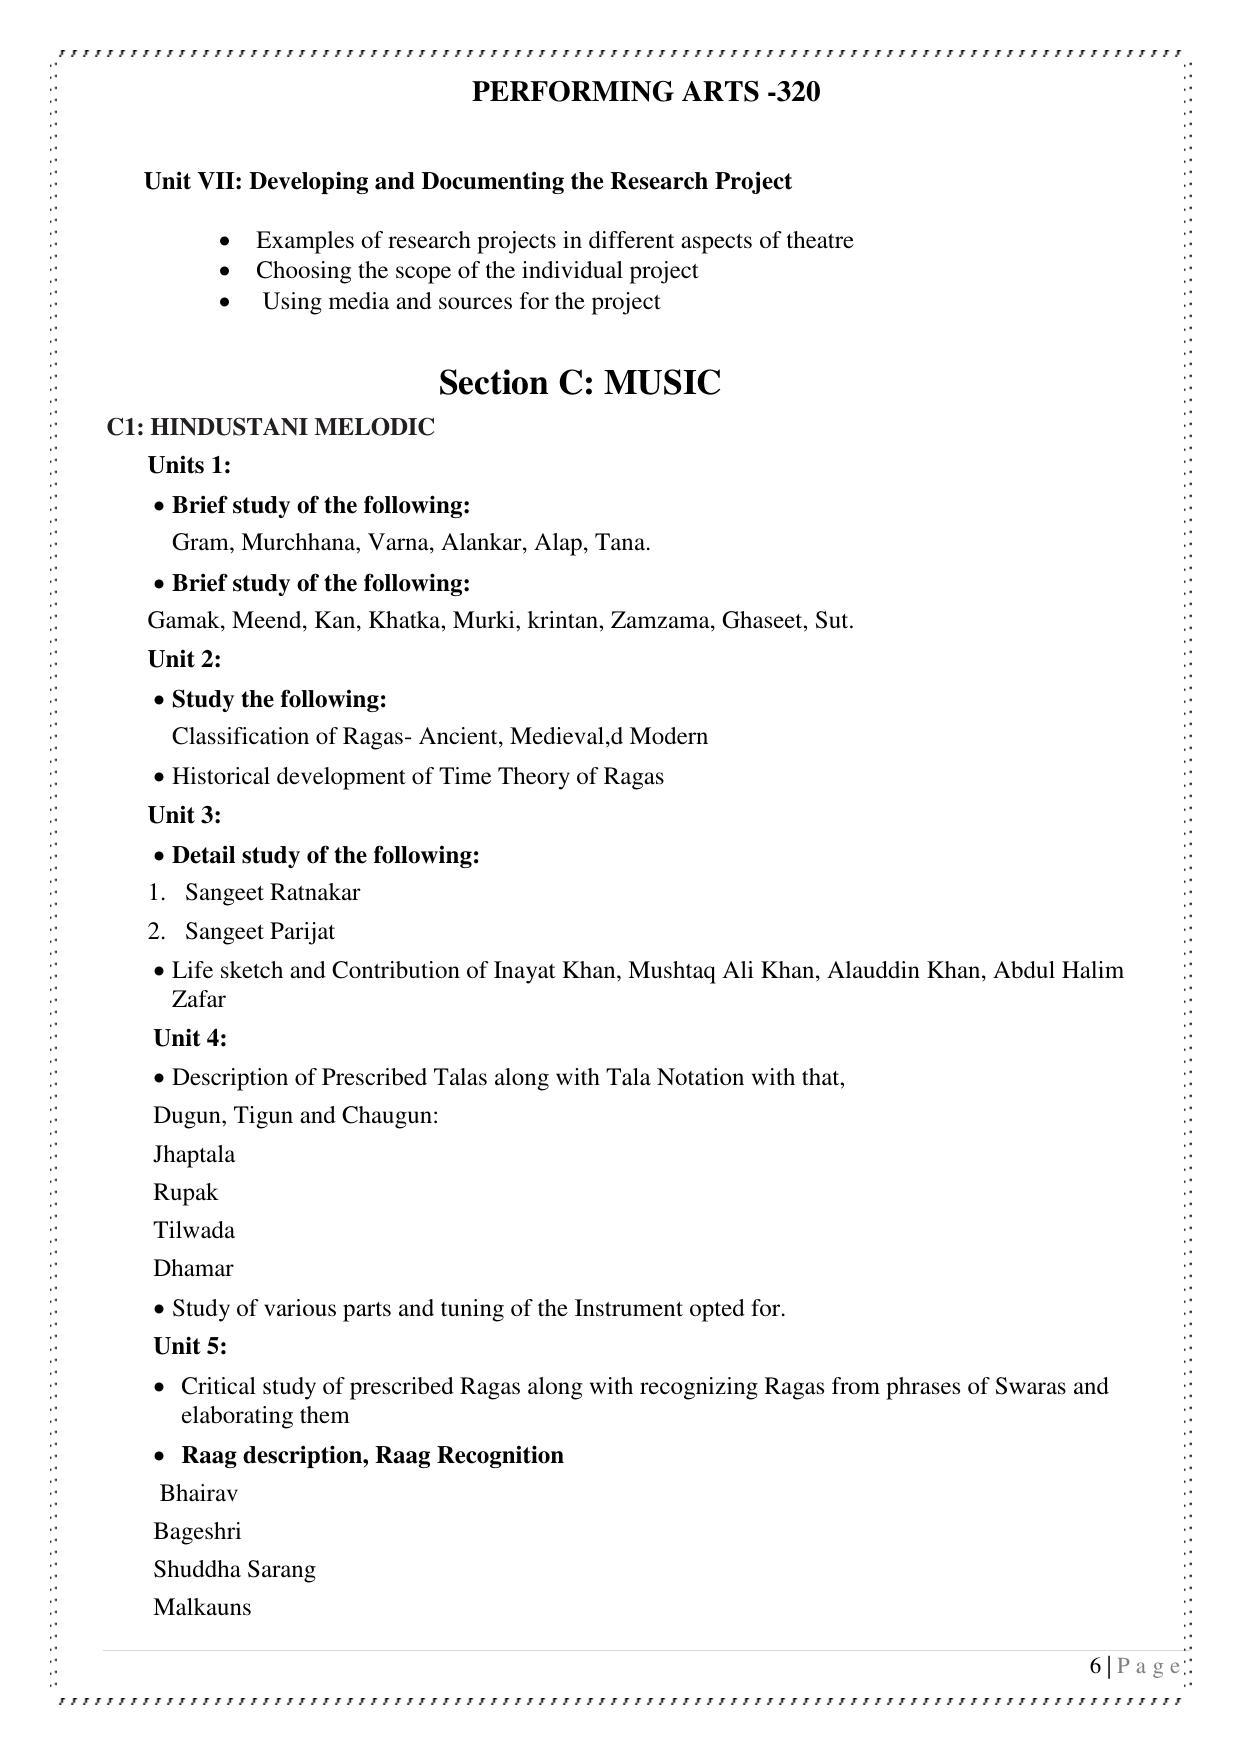 CUET Syllabus for Performing Arts (English) - Page 6